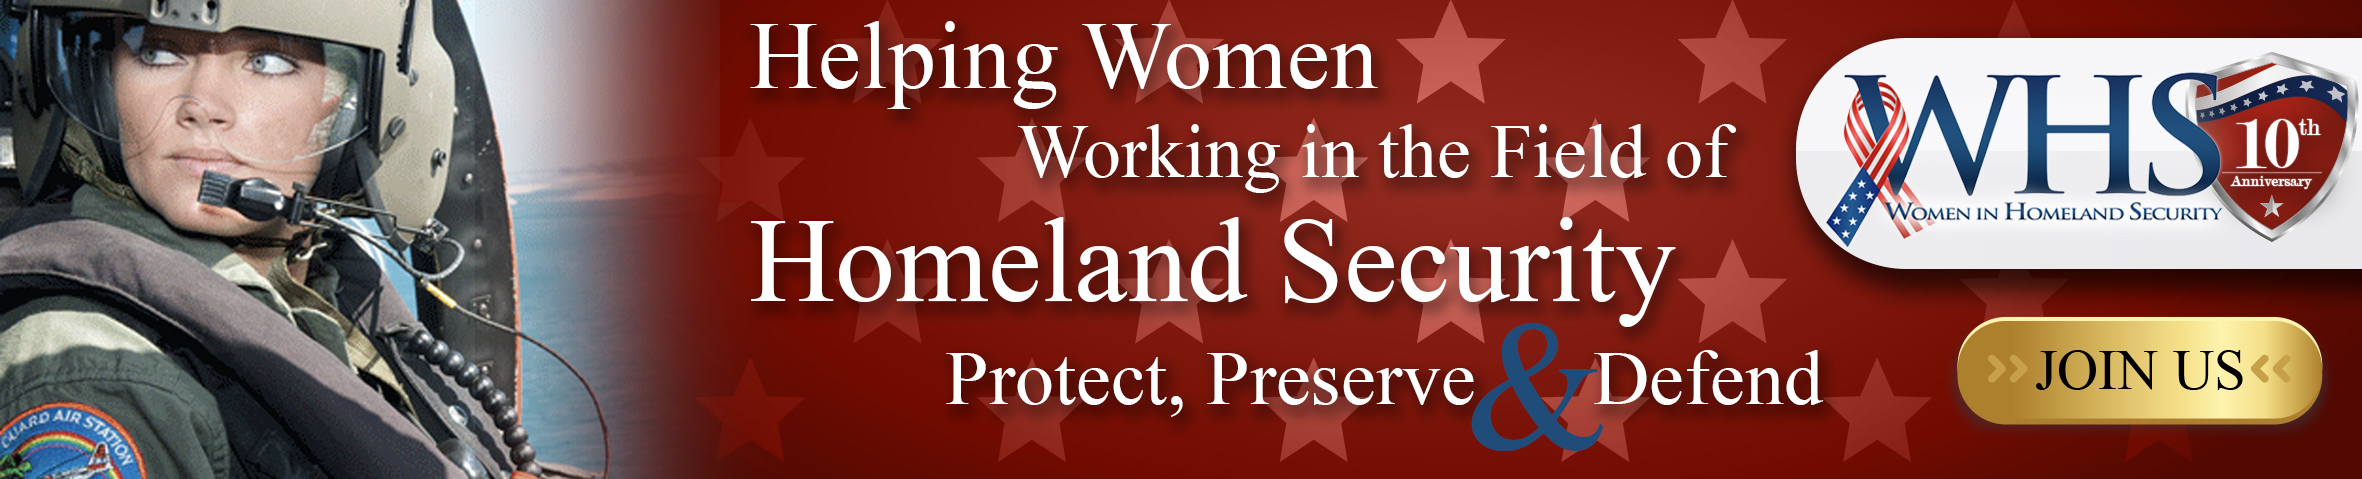 Helping Women Working in the Field of Homeland Security Protect, Preserve, and Defend